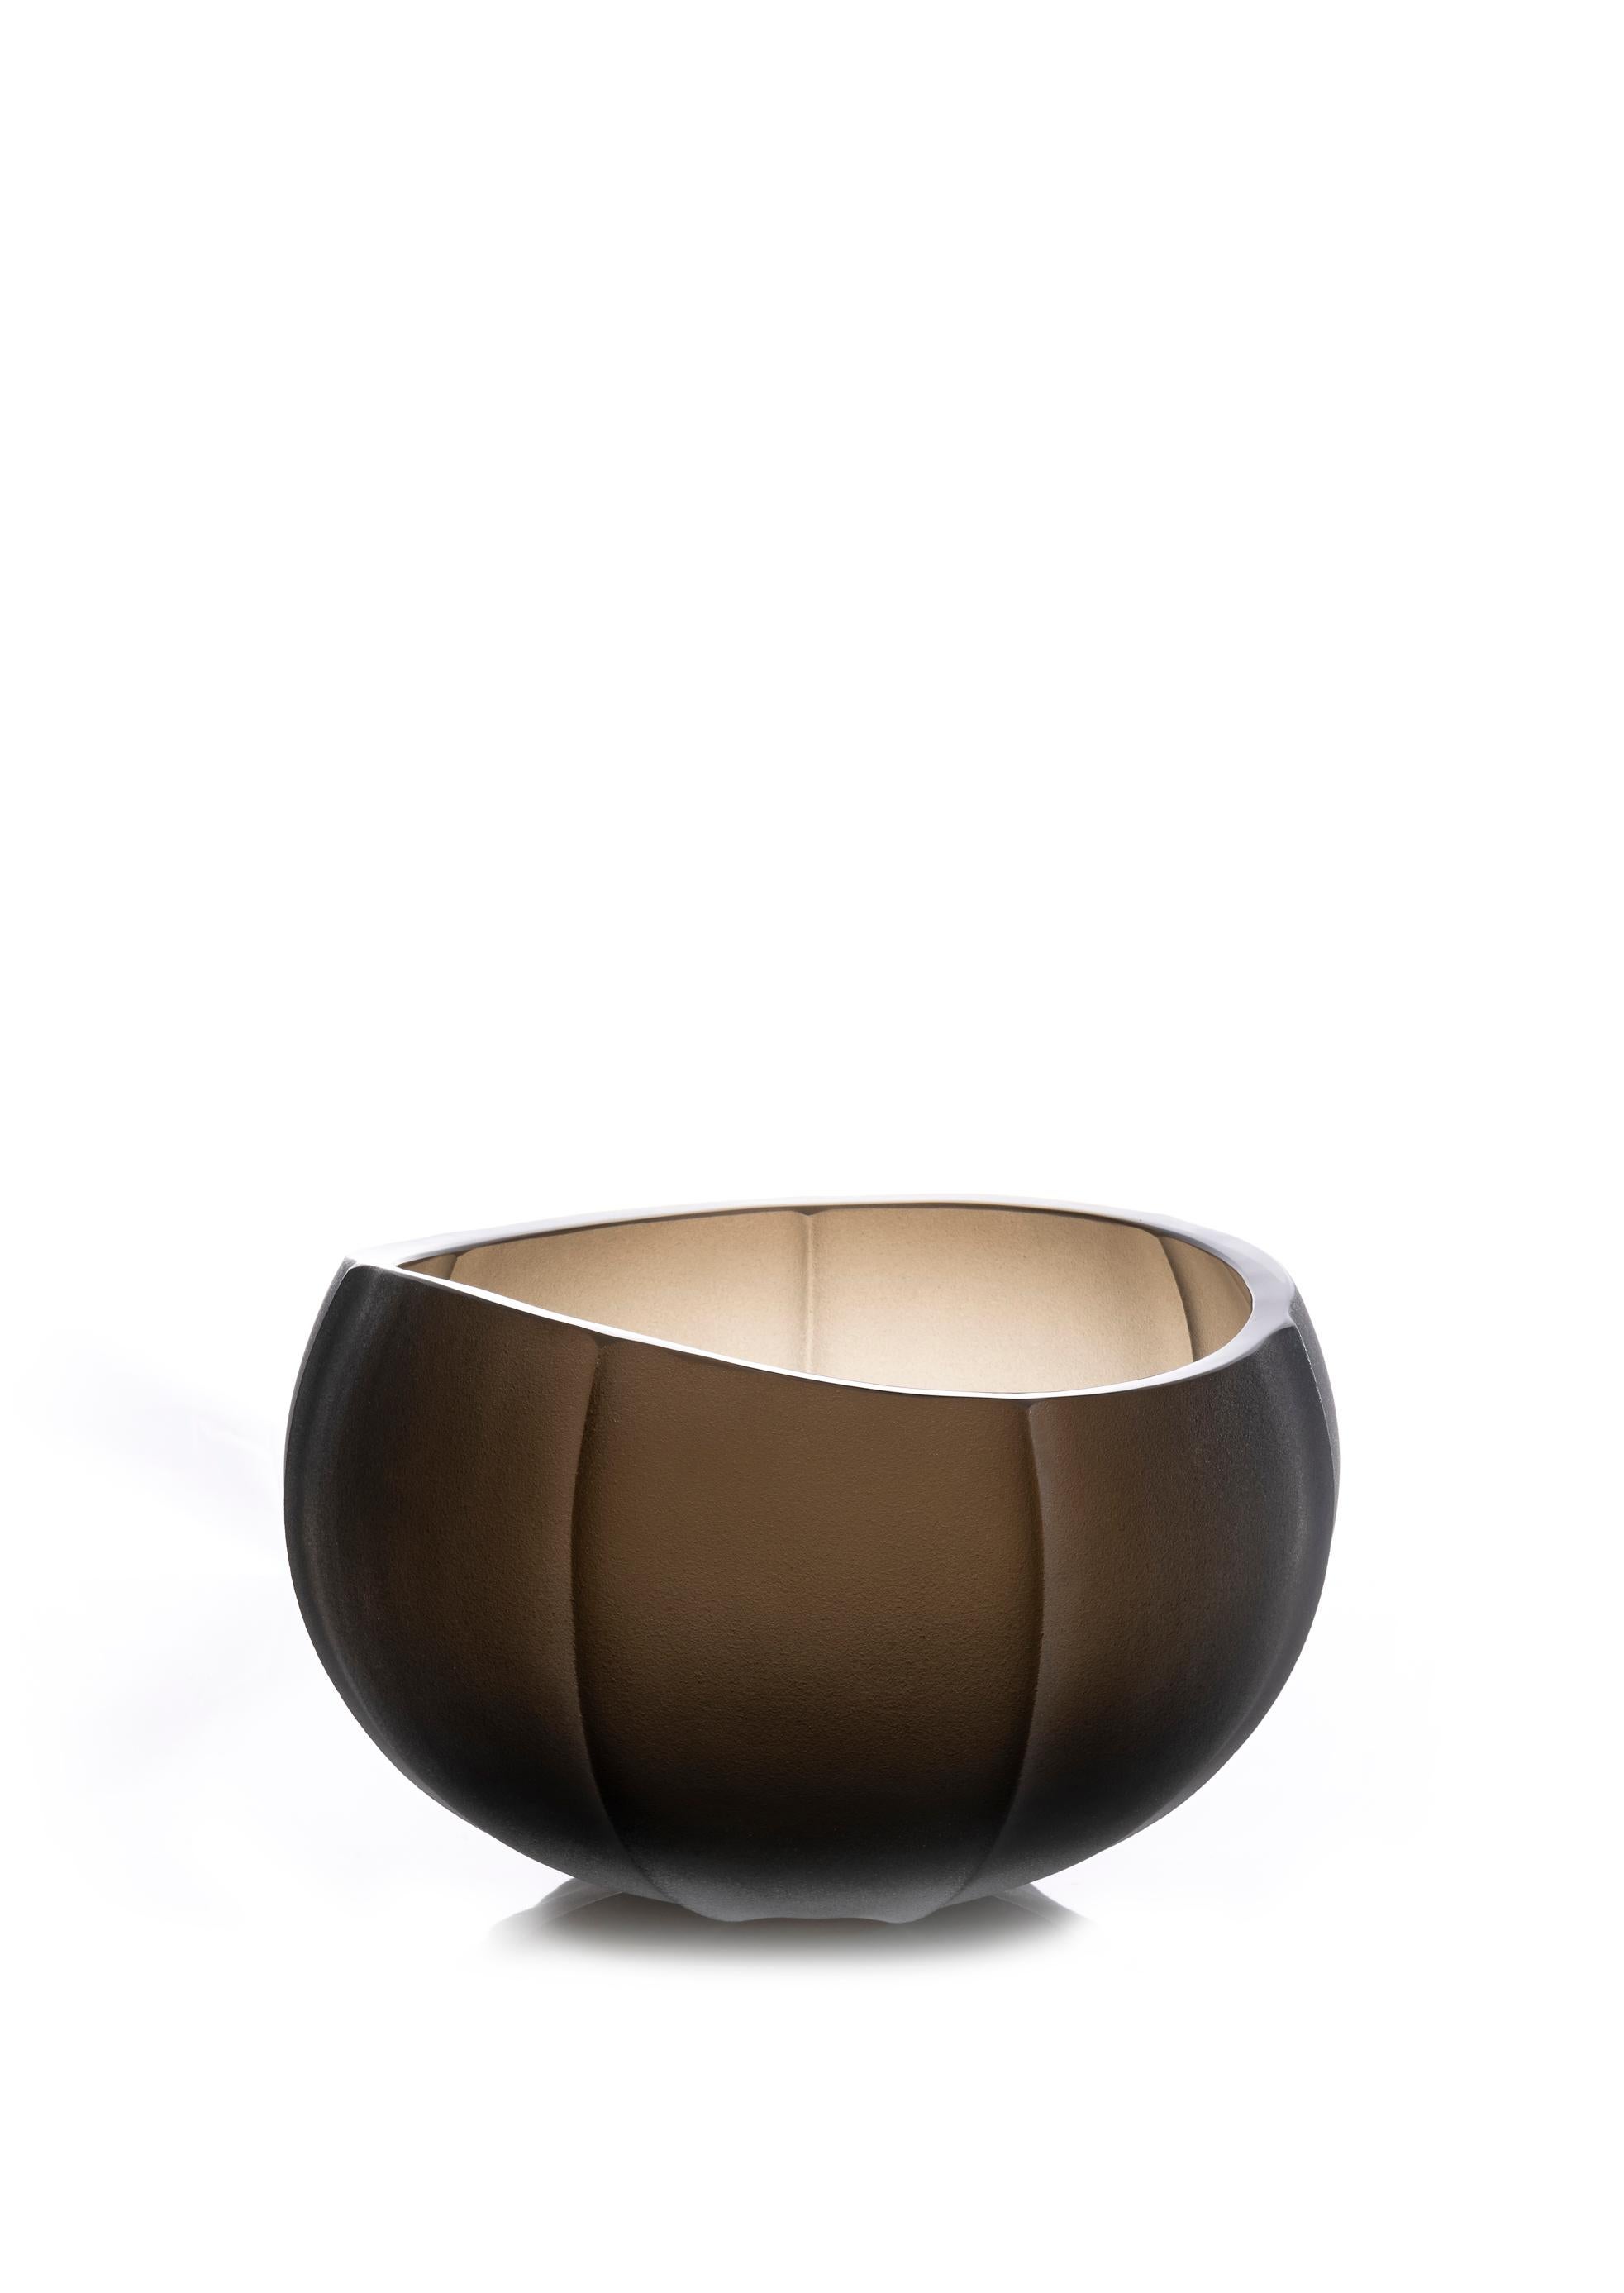 Linae medium vase, Murano glass, designed by Federico Peri, 21st century.
The Linae vase, circular pots with a blunt rim are made in solid color and thick blown Murano glass, are available in three different shapes and different finishes / incisions